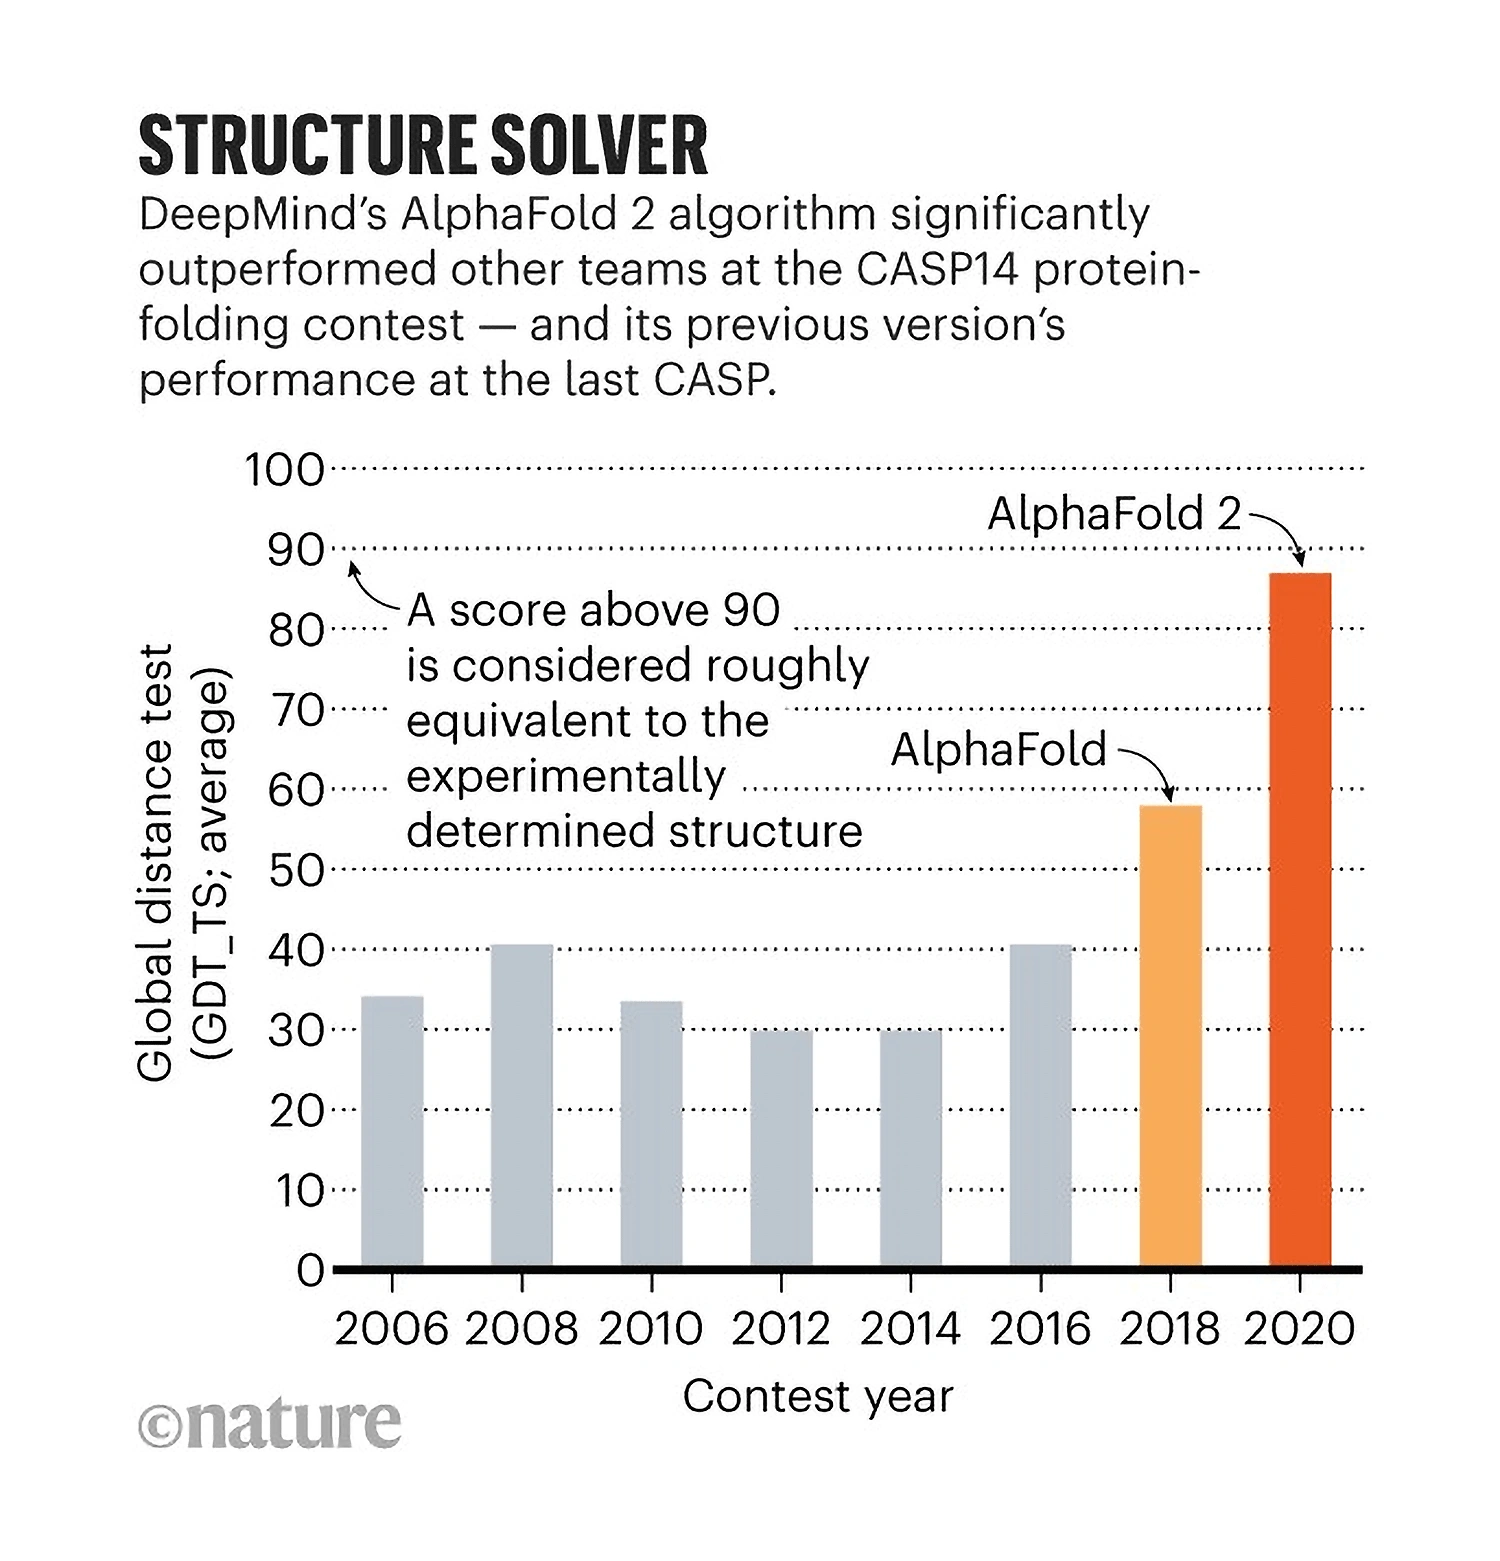 alphafold-structure-solver-min.png